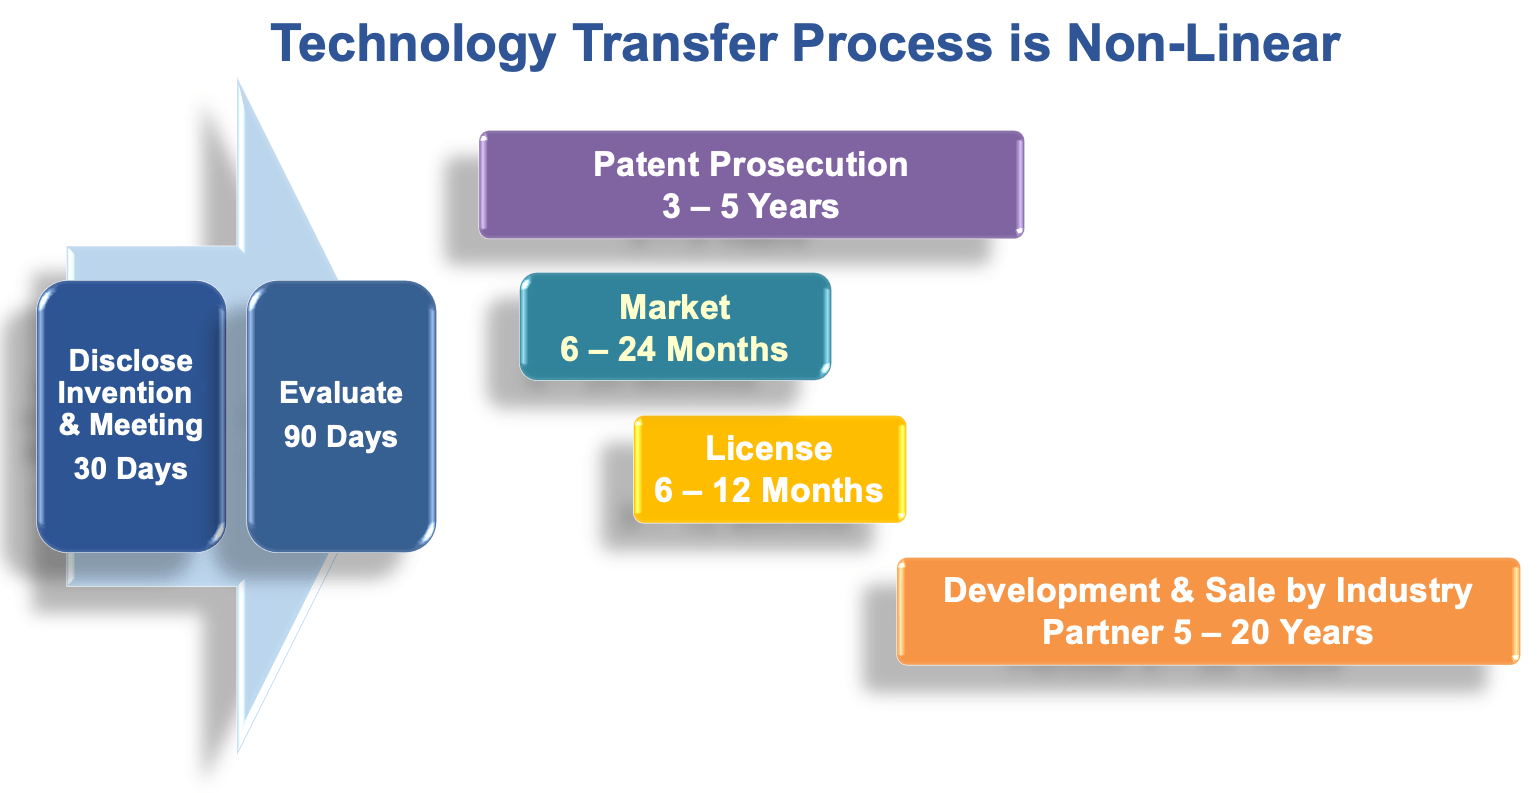 Technology Transfer process is non-linear graph